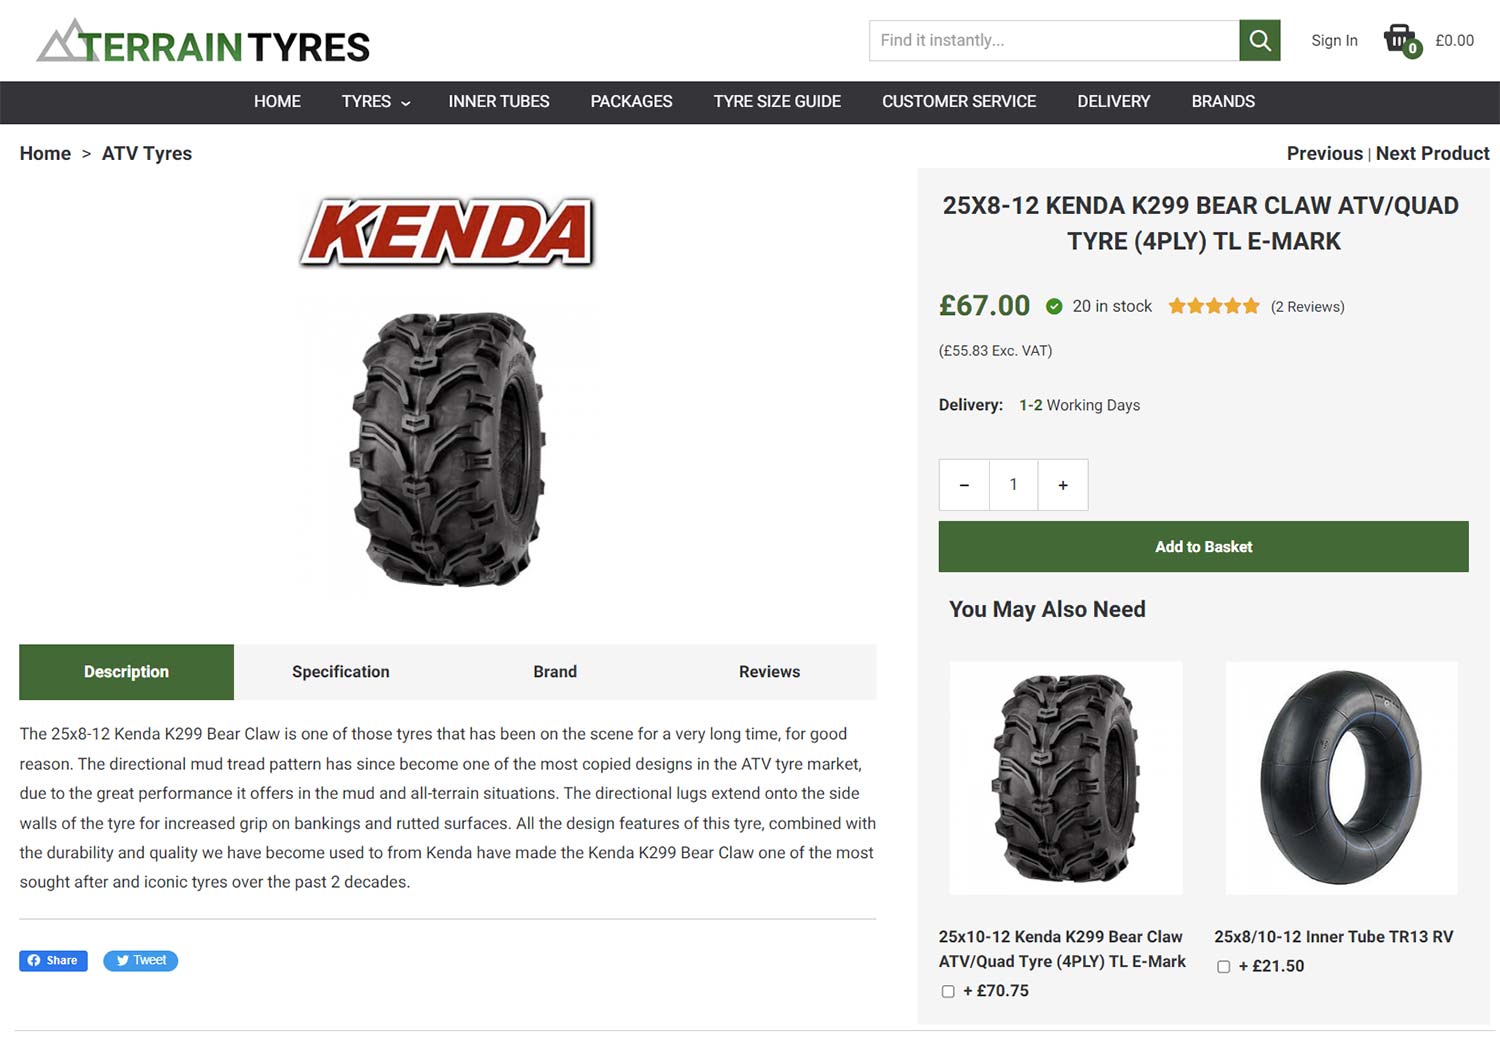 Terrain Tyres Product Page